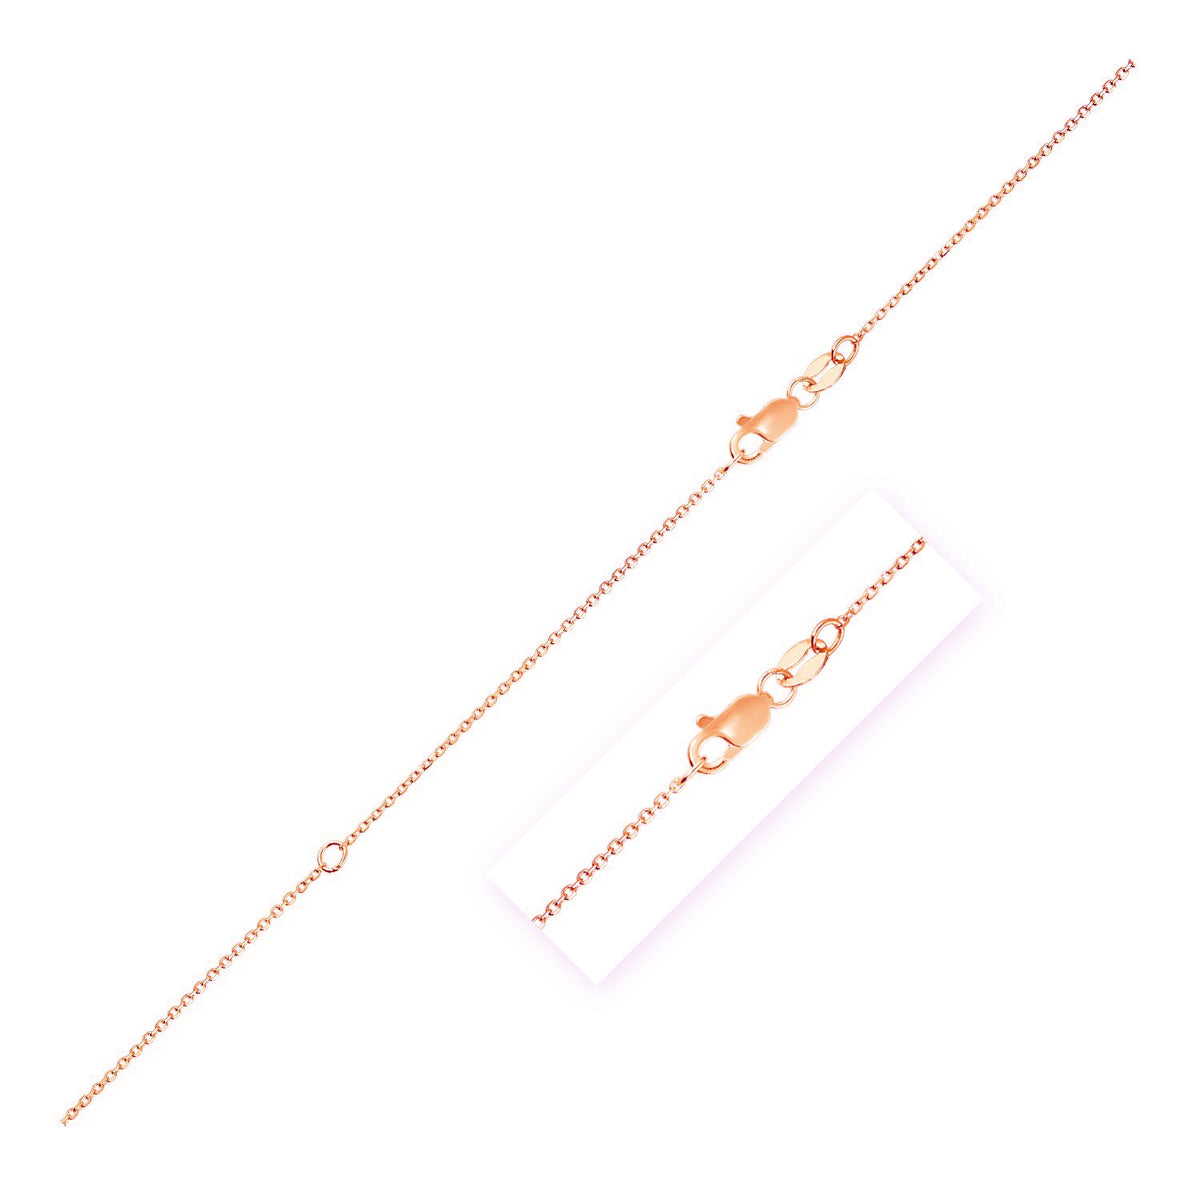 Adjustable Cable Chain - 14k Rose Gold 1.10mm